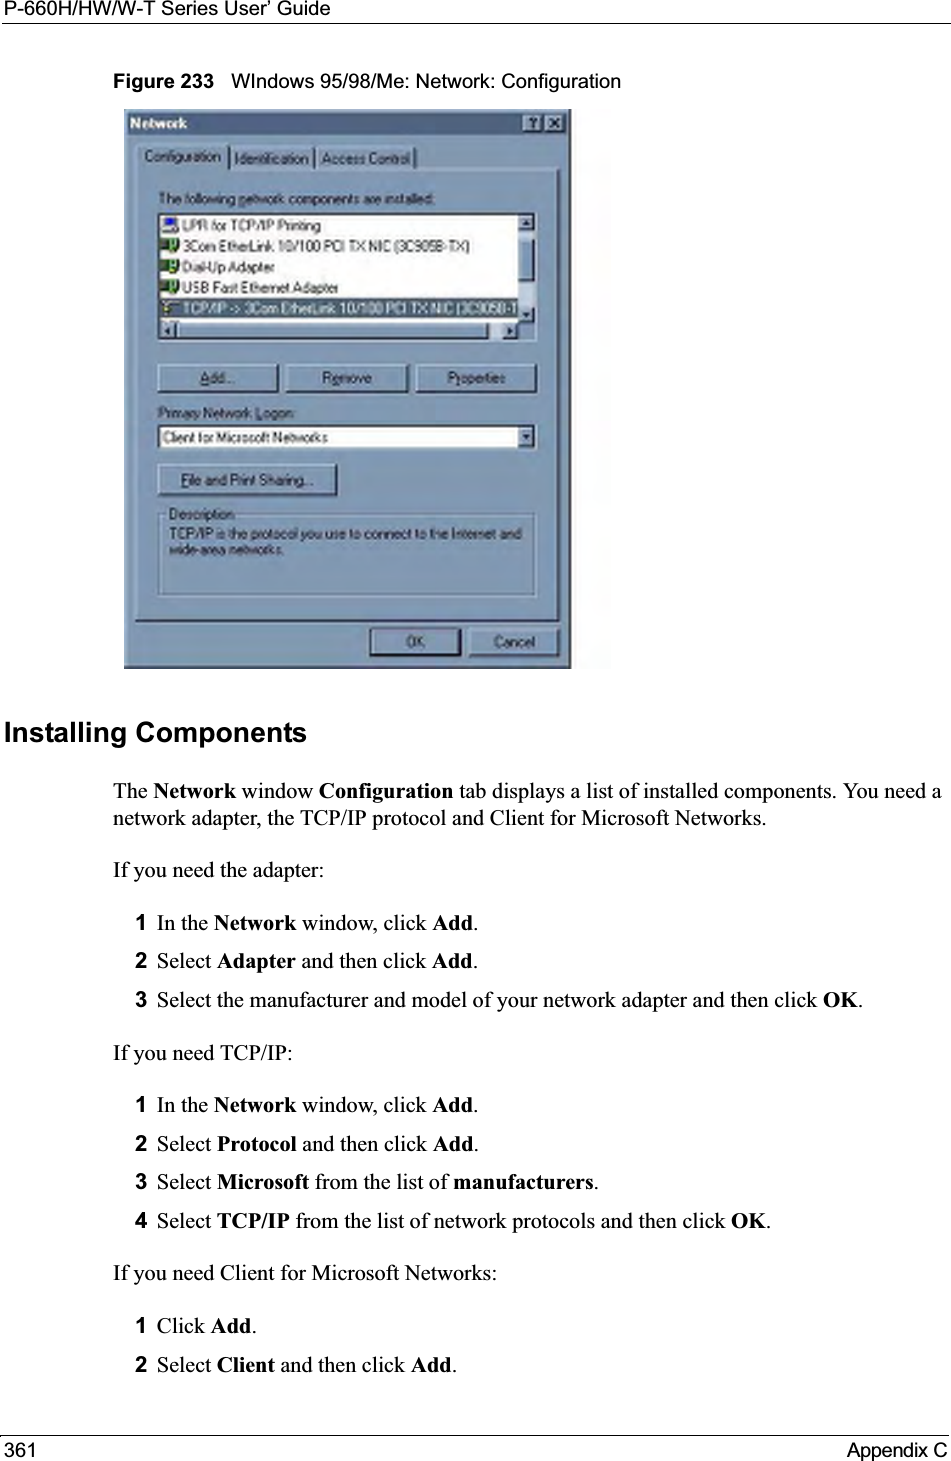 P-660H/HW/W-T Series User’ Guide361 Appendix CFigure 233   WIndows 95/98/Me: Network: ConfigurationInstalling ComponentsThe Network window Configuration tab displays a list of installed components. You need a network adapter, the TCP/IP protocol and Client for Microsoft Networks.If you need the adapter:1In the Network window, click Add.2Select Adapter and then click Add.3Select the manufacturer and model of your network adapter and then click OK.If you need TCP/IP:1In the Network window, click Add.2Select Protocol and then click Add.3Select Microsoft from the list of manufacturers.4Select TCP/IP from the list of network protocols and then click OK.If you need Client for Microsoft Networks:1Click Add.2Select Client and then click Add.